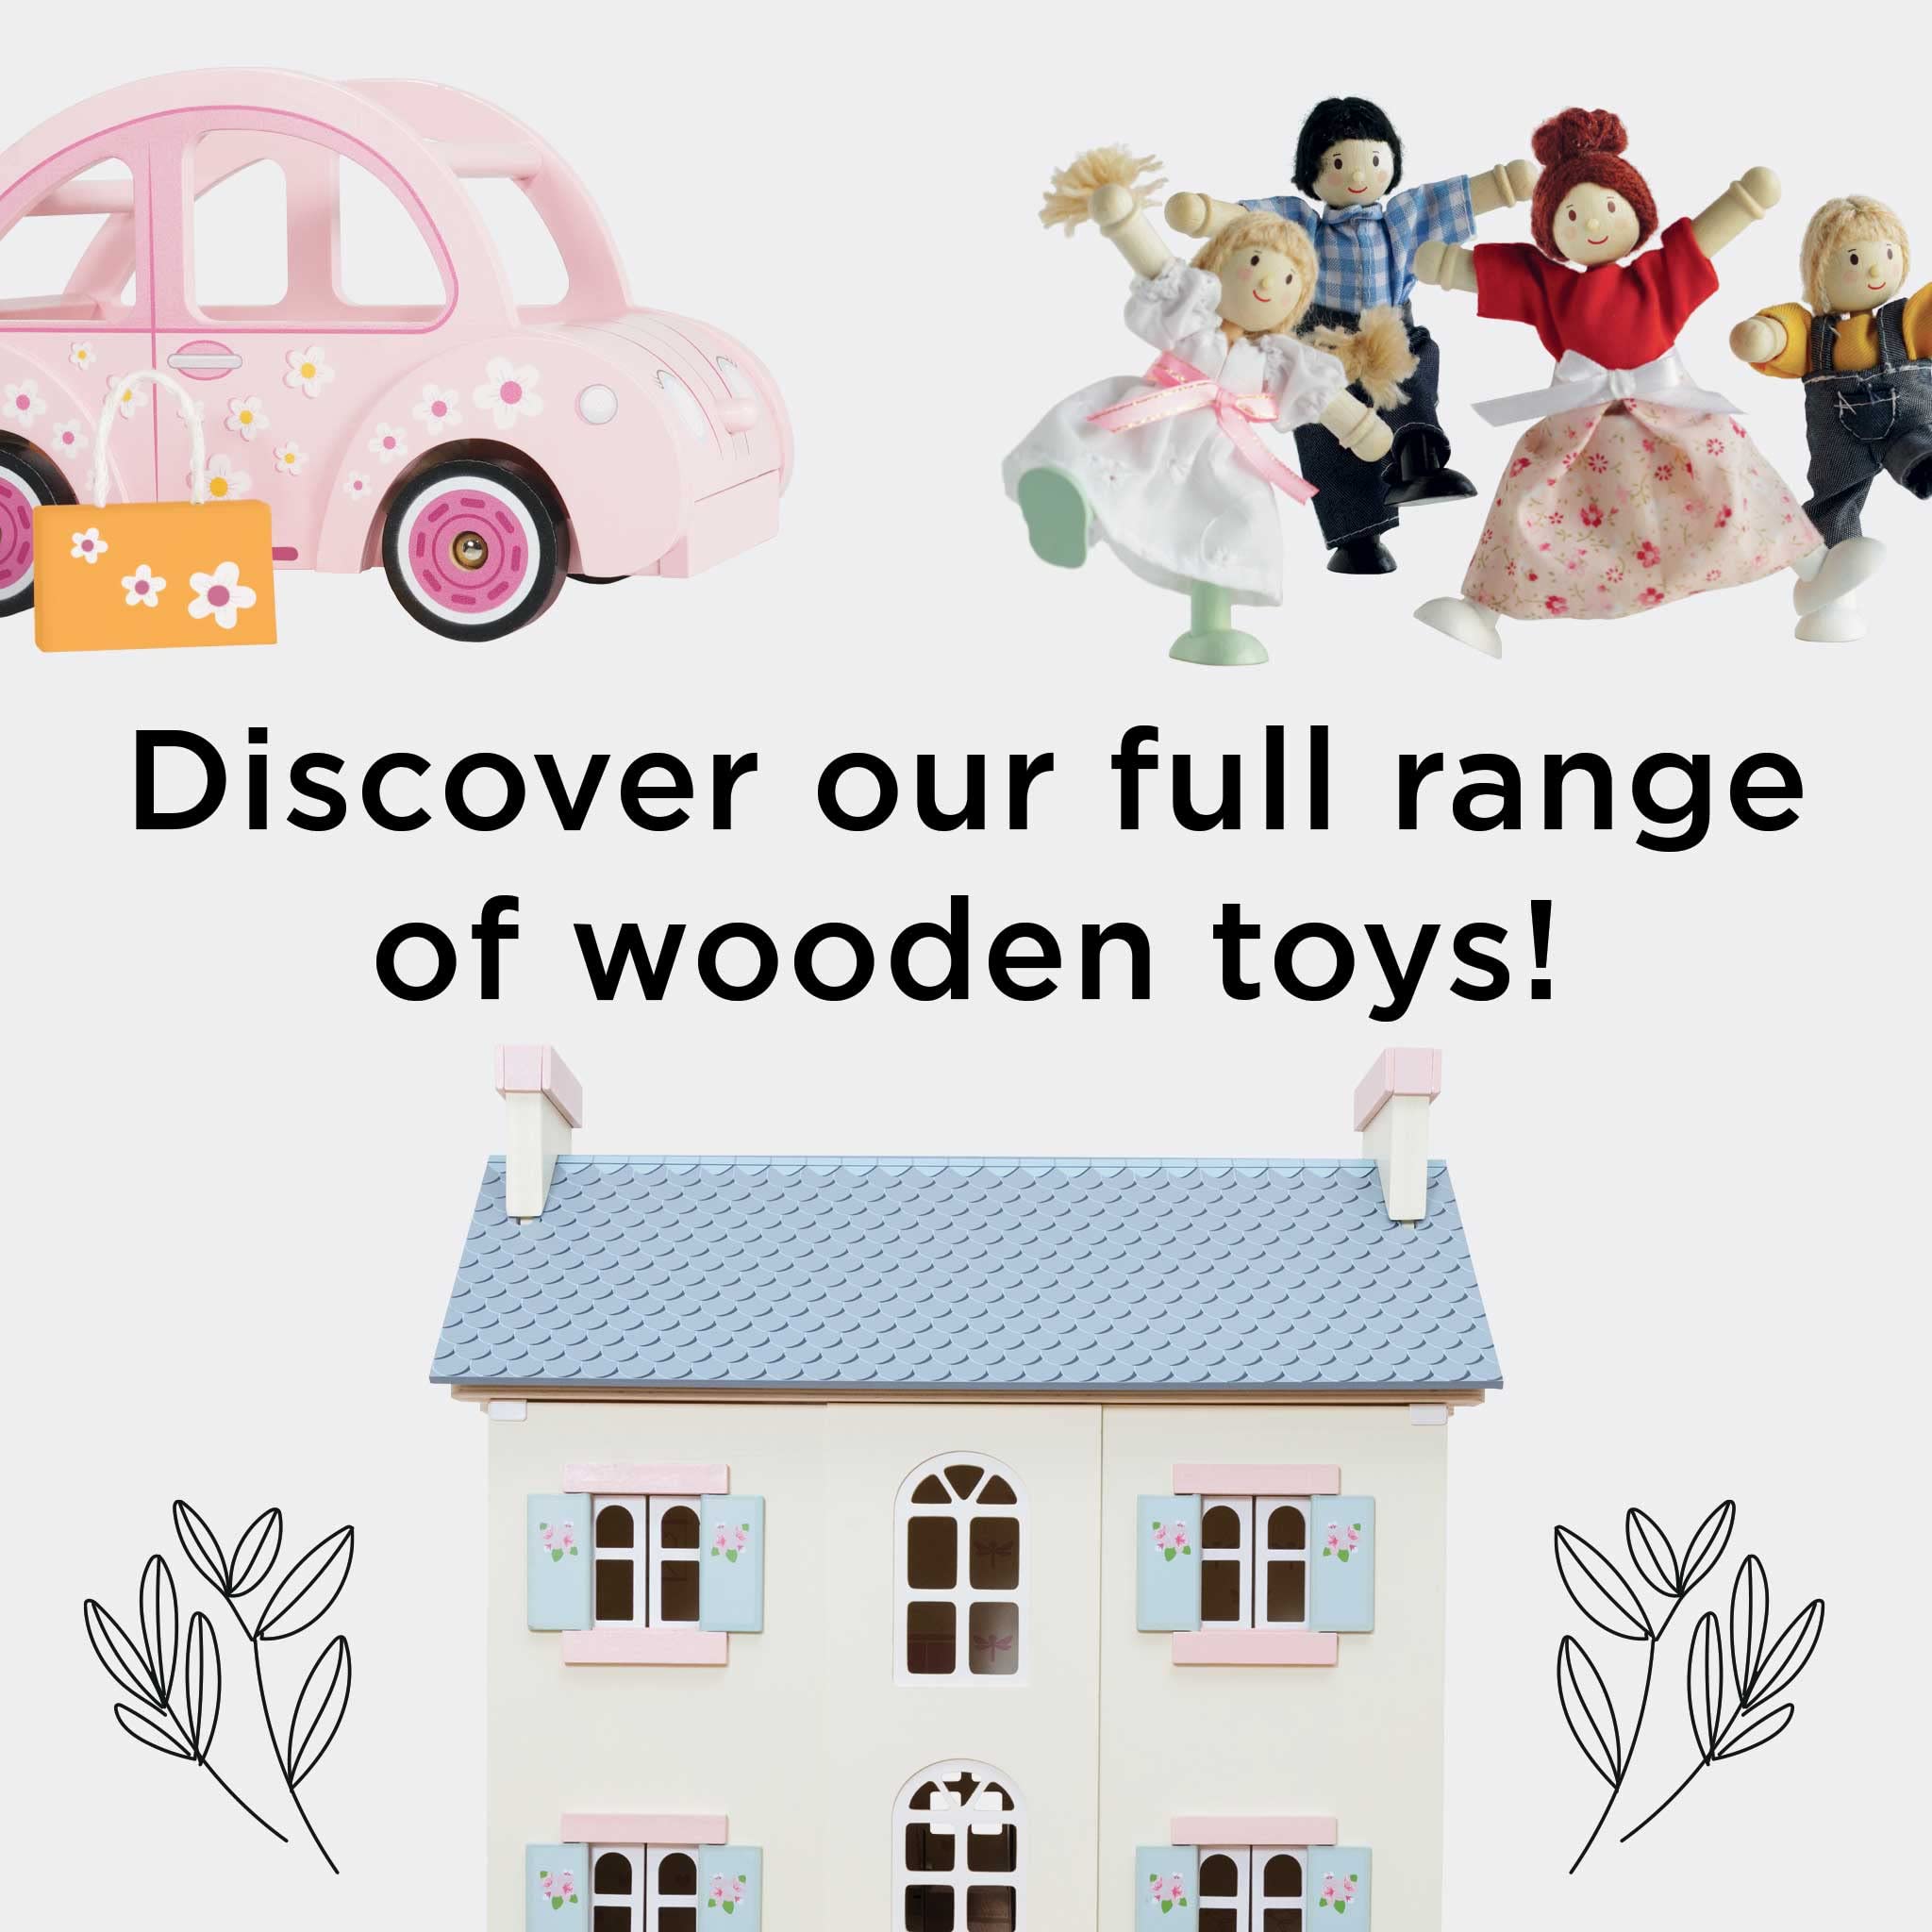 Le Toy Van - Wooden Daisylane Sophie's Car Accessories Play Set for Dolls Houses - Wooden Car Toy with Luggage Accessory - Dollhouse Accessories - Suitable for Ages 2+,Bright Pink, Medium